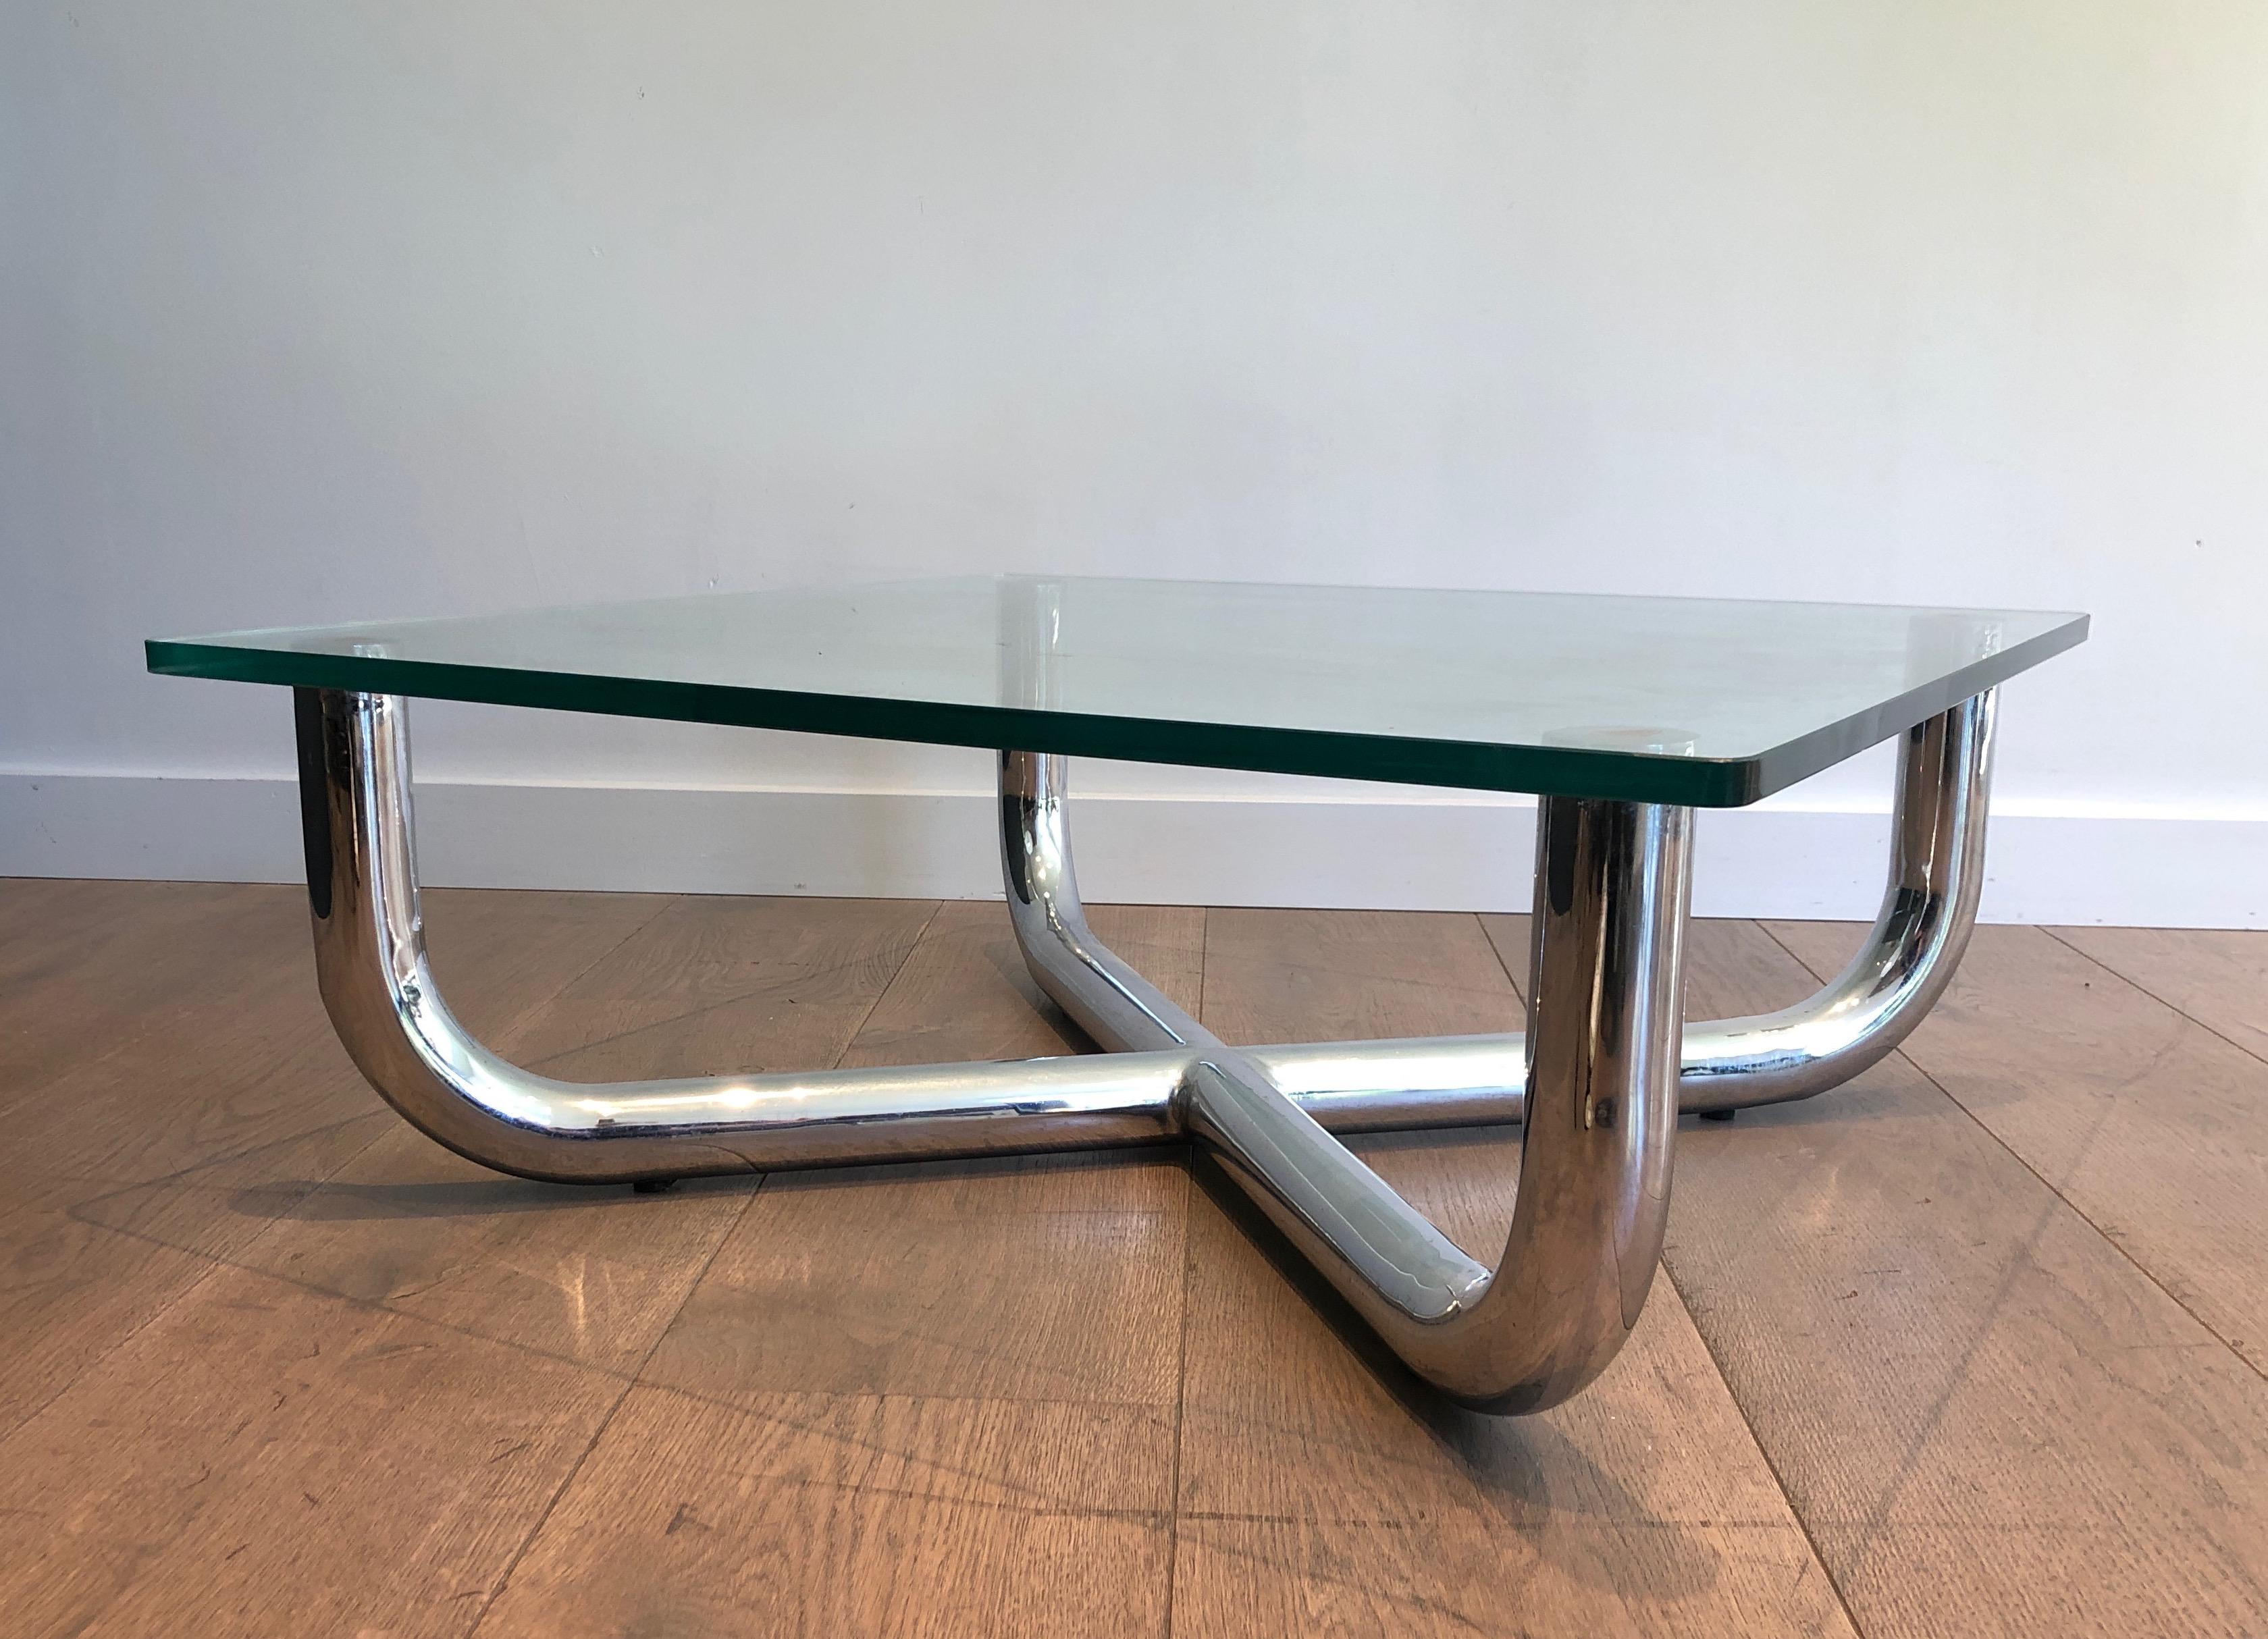 Late 20th Century Chromed Coffee Table with Glass Shelf, French Work, Circa 1970 For Sale